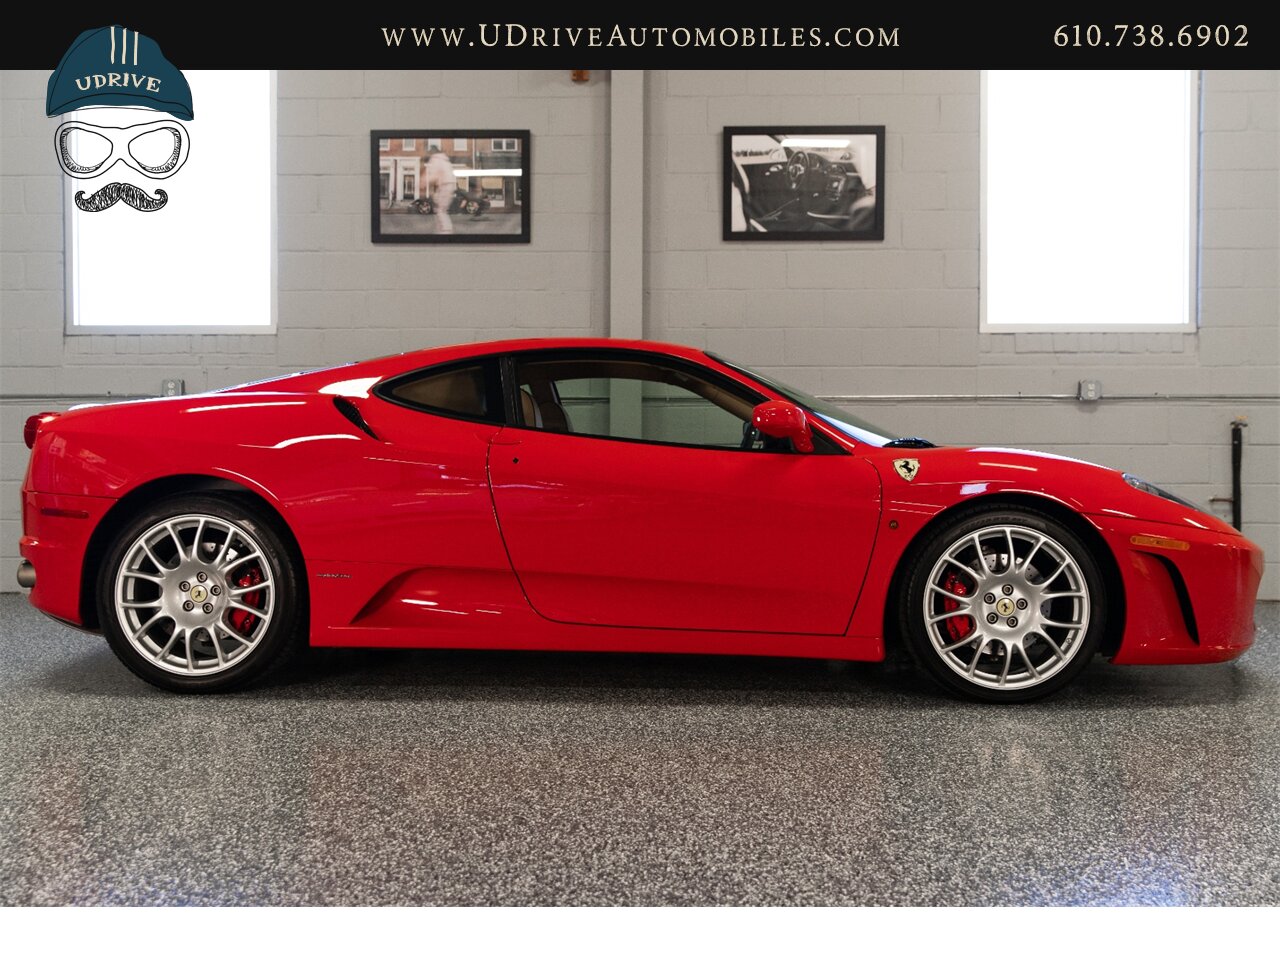 2006 Ferrari F430 F1 Coupe 1 Owner Daytona Seats Challenge Whls  Carbon Fibre Upper Lower Zone Shields Piping Serv Hist $208k MSRP - Photo 14 - West Chester, PA 19382